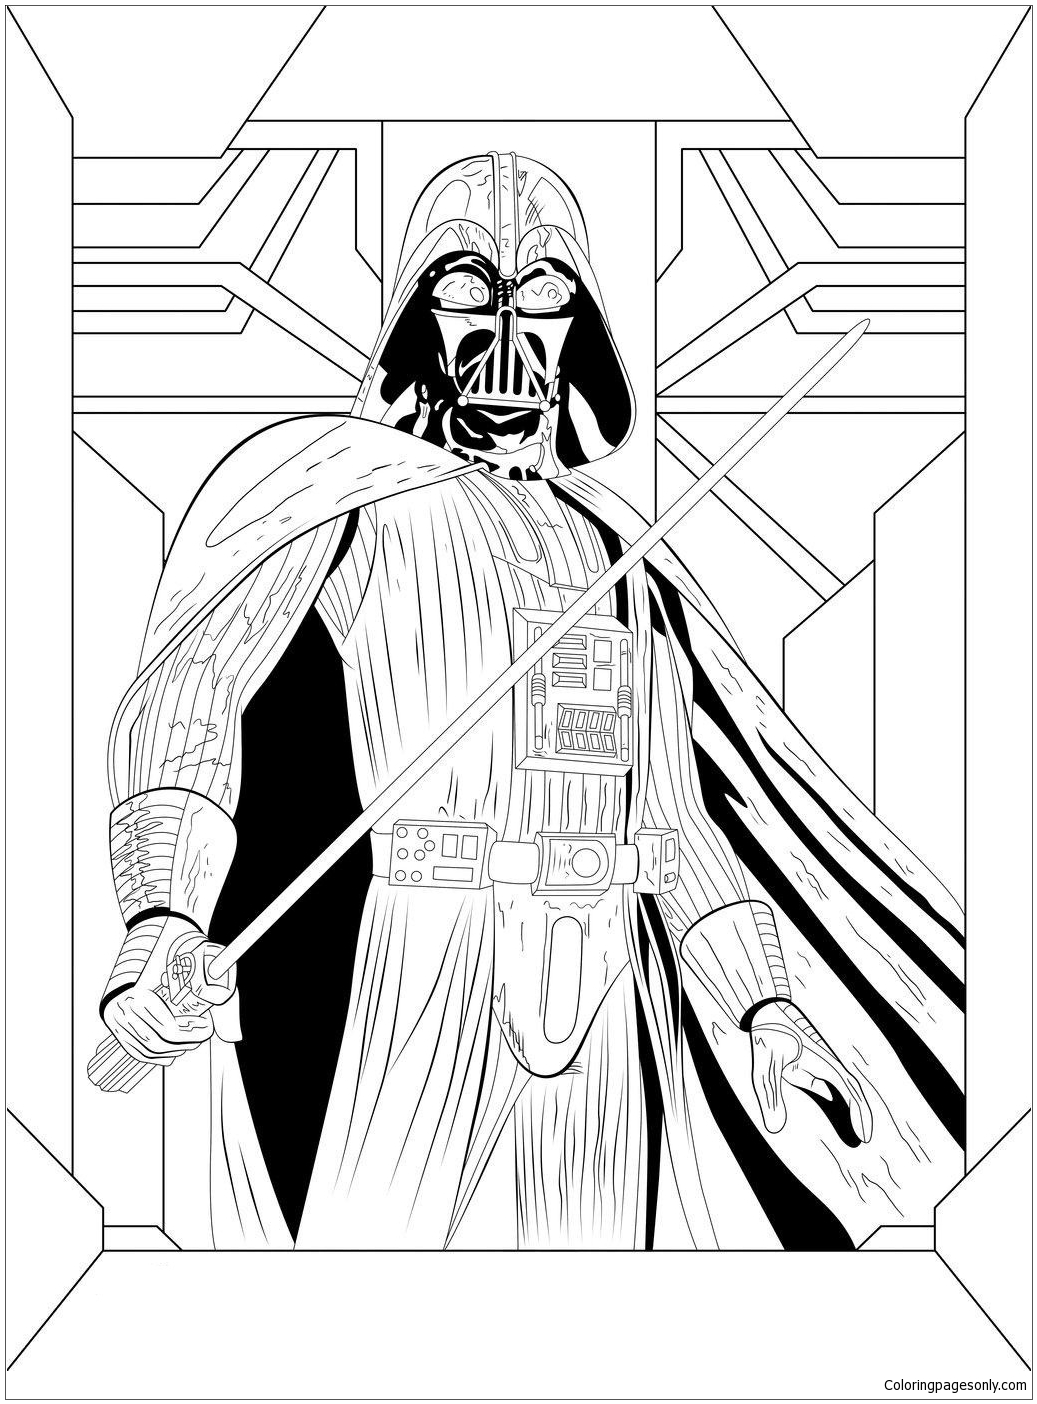 Darth Vader from Star Wars 2 Coloring Pages - Cartoons Coloring Pages